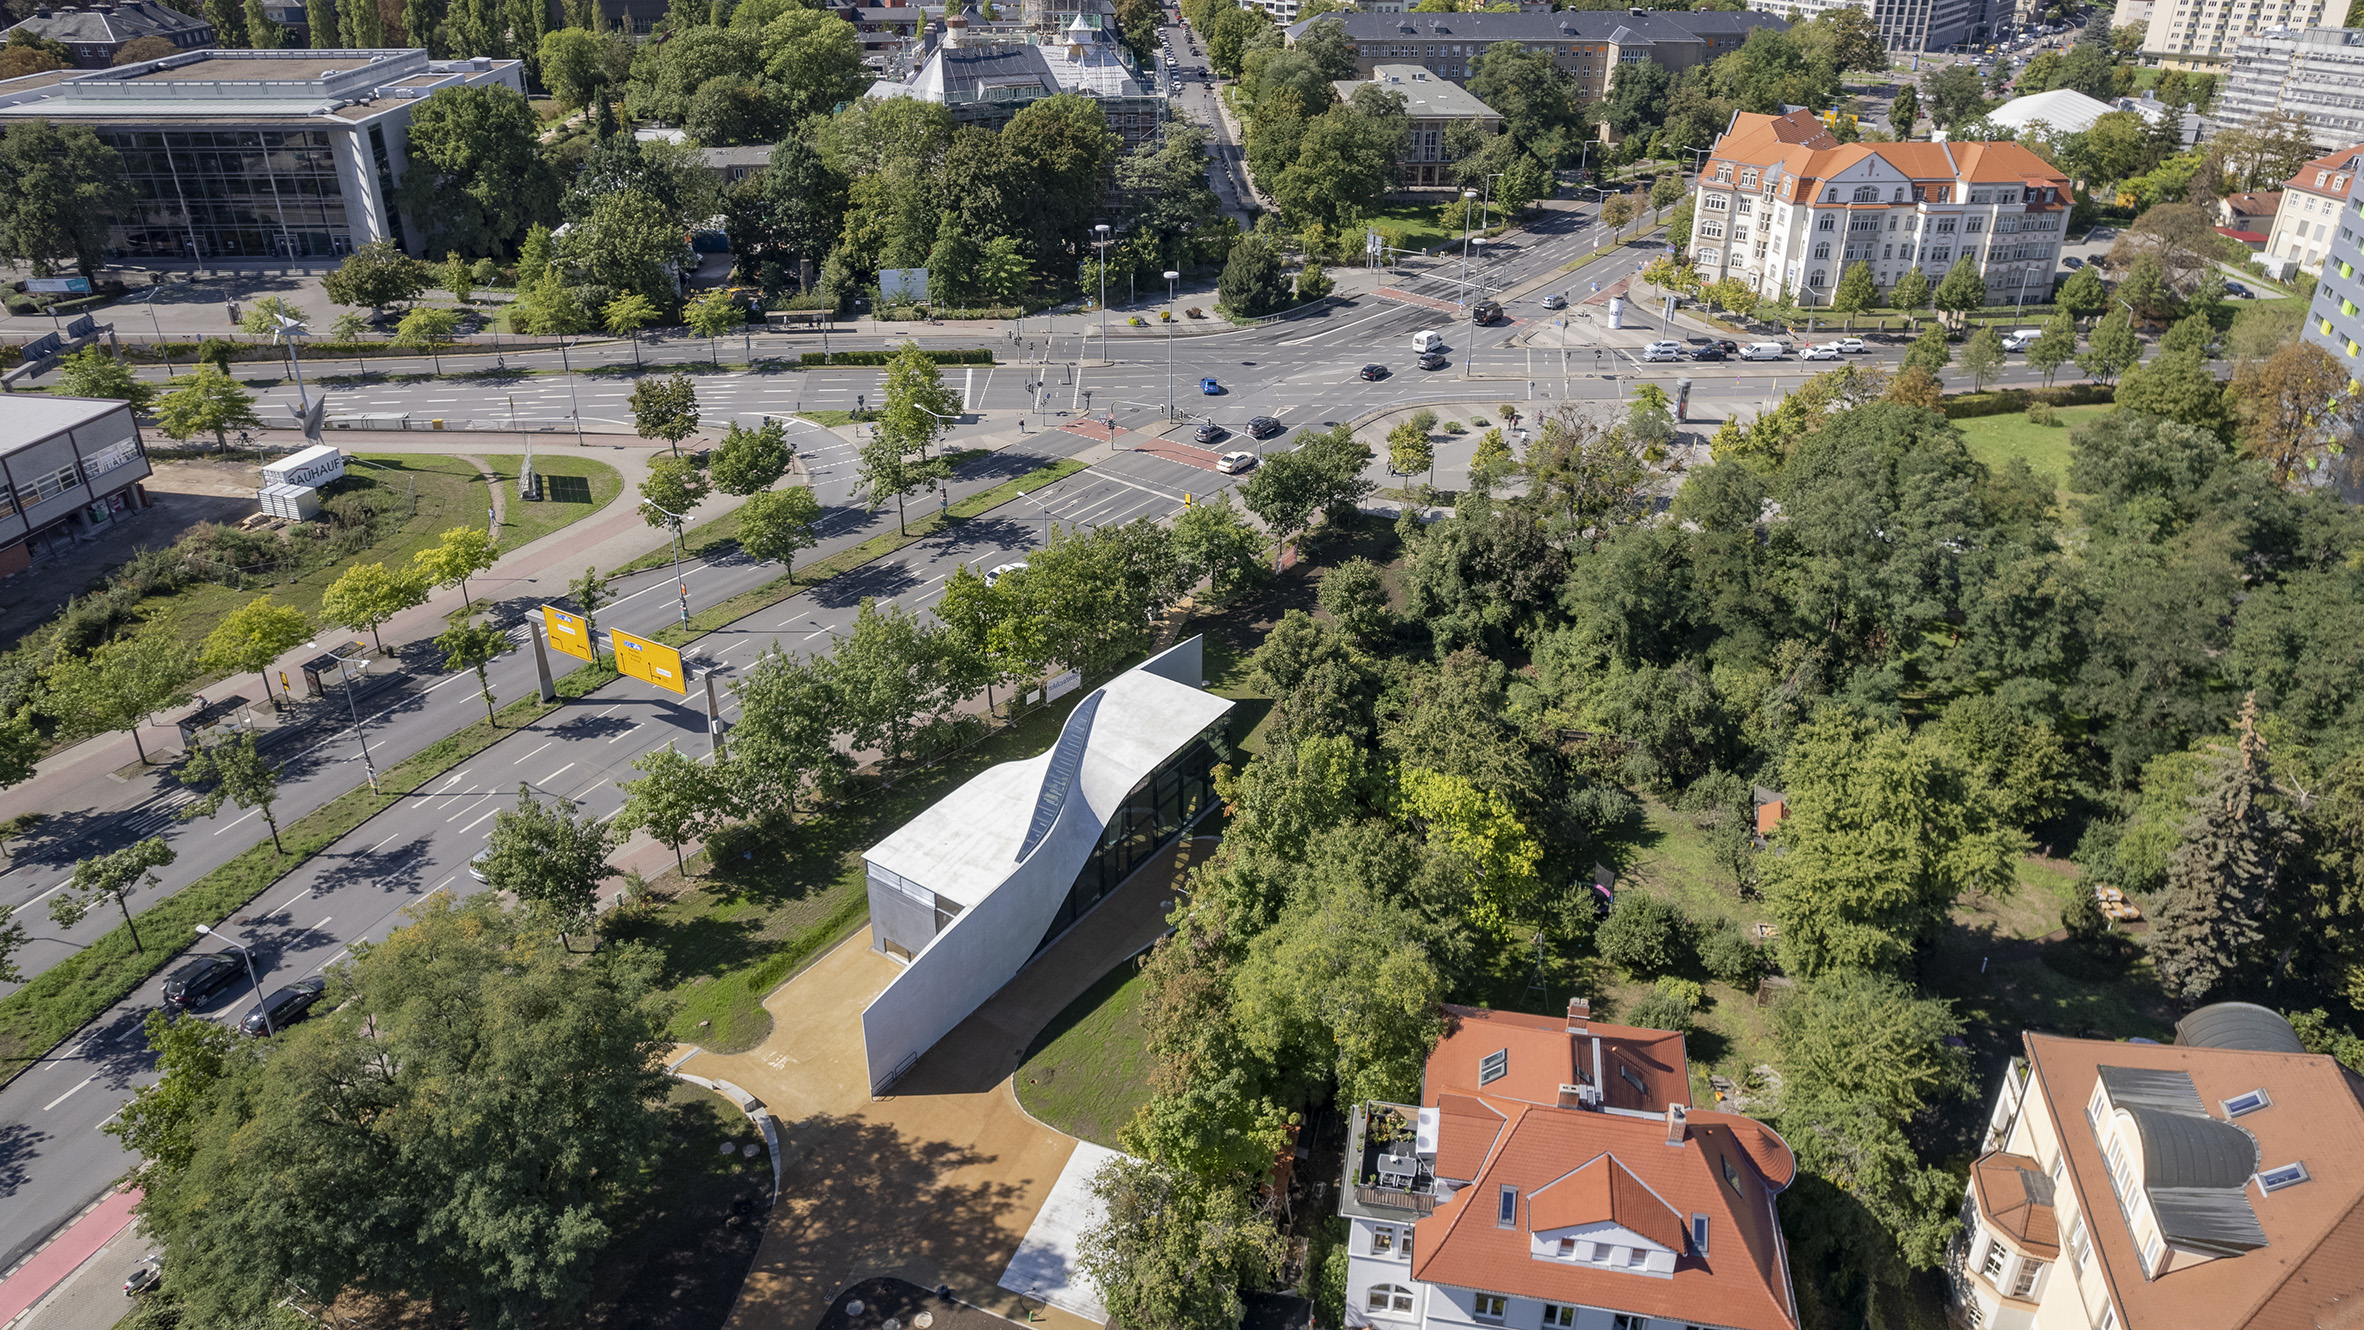 The Cube by TU Dresden and Henn